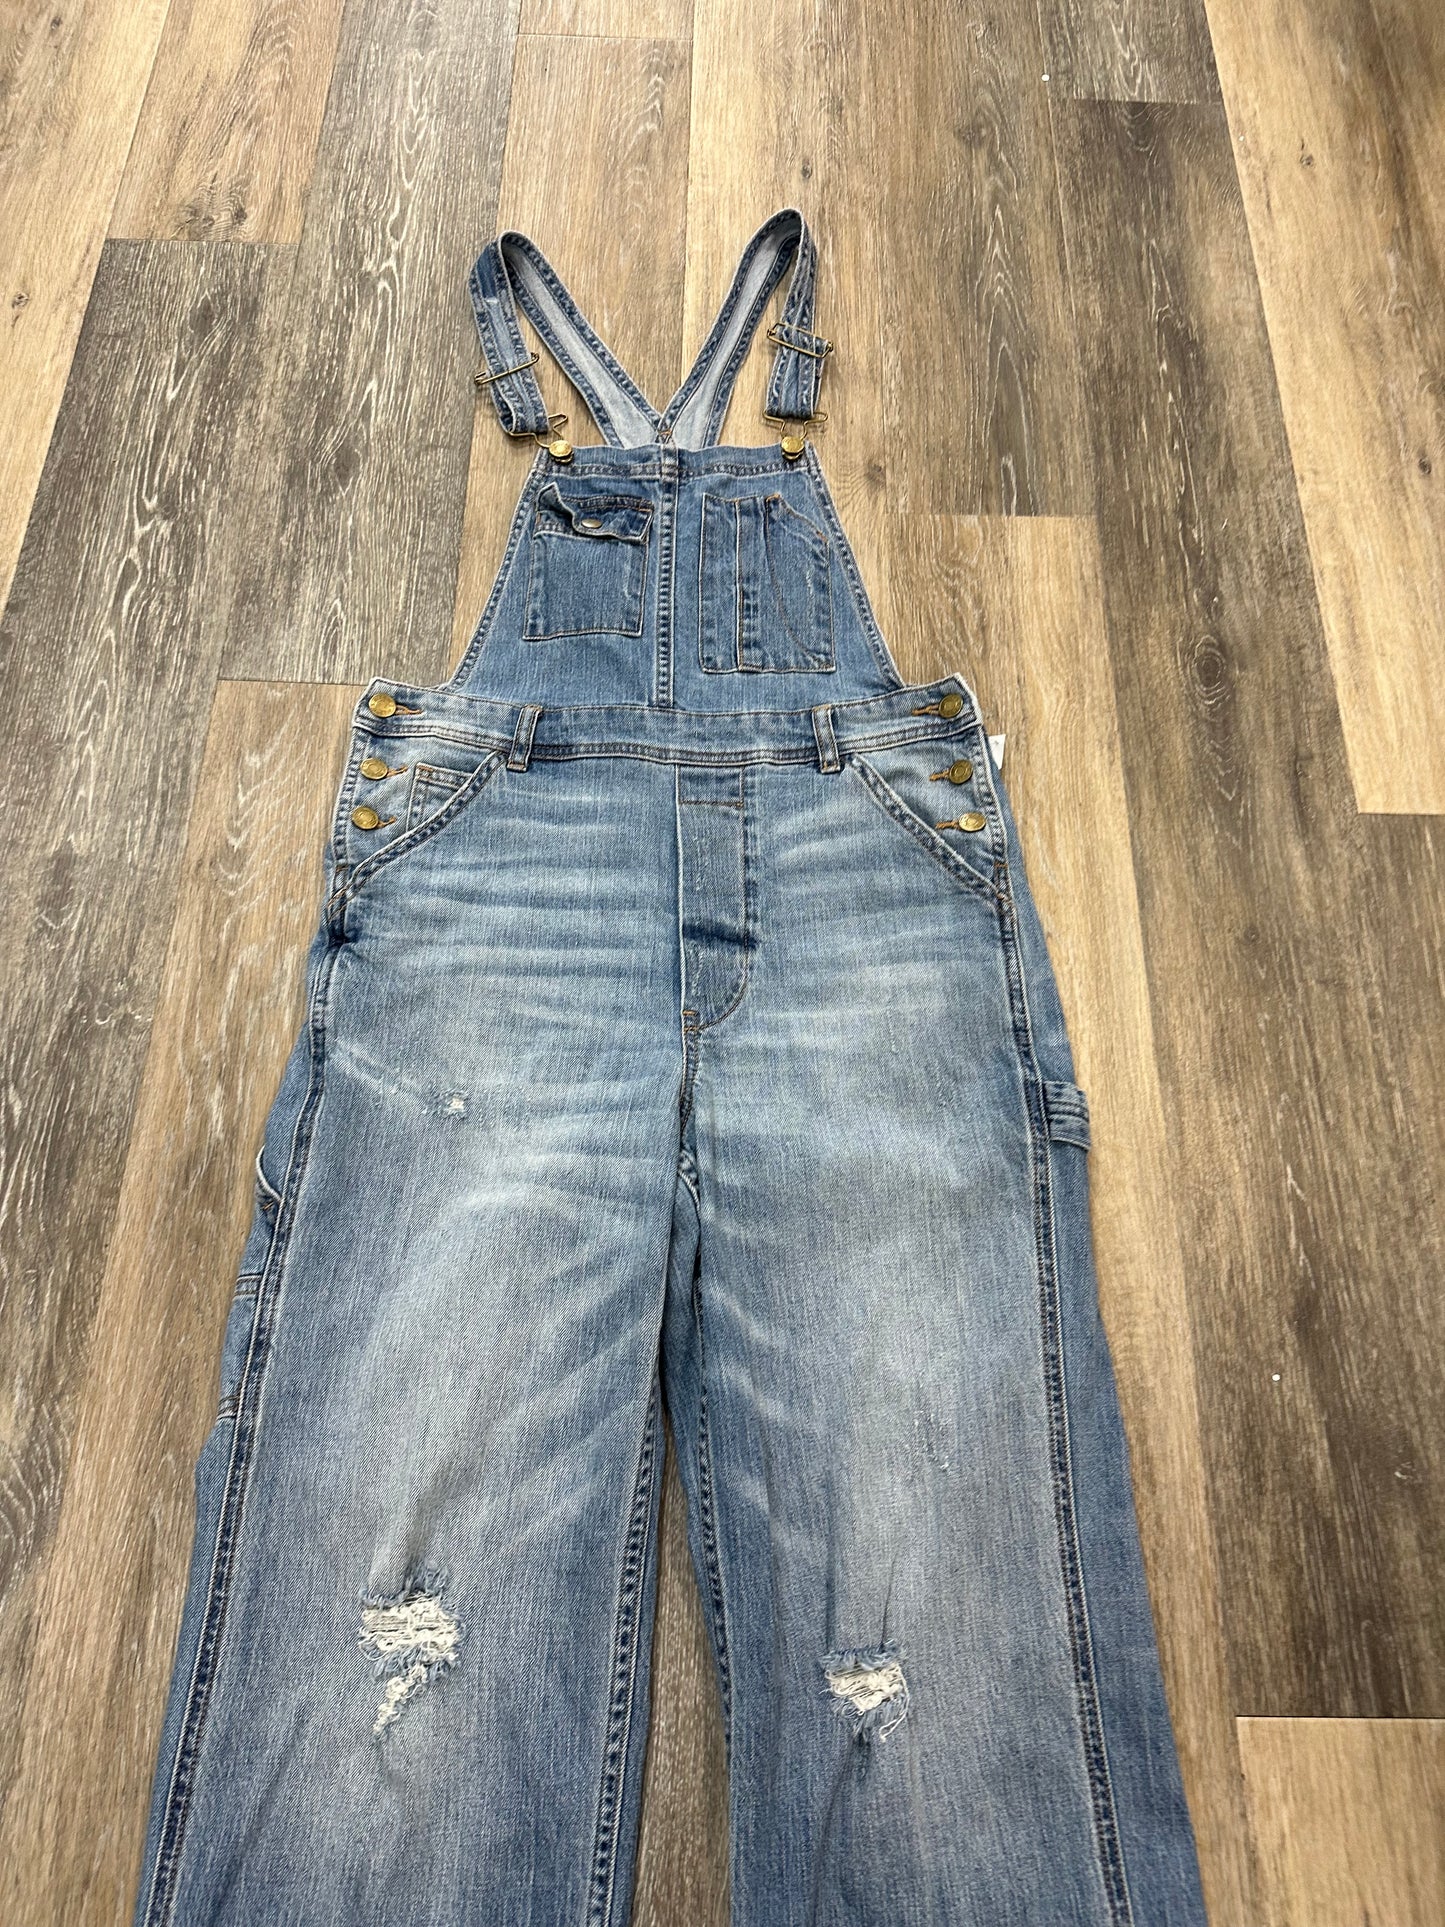 Overalls By Anthropologie(Pilcro)  Size: 4